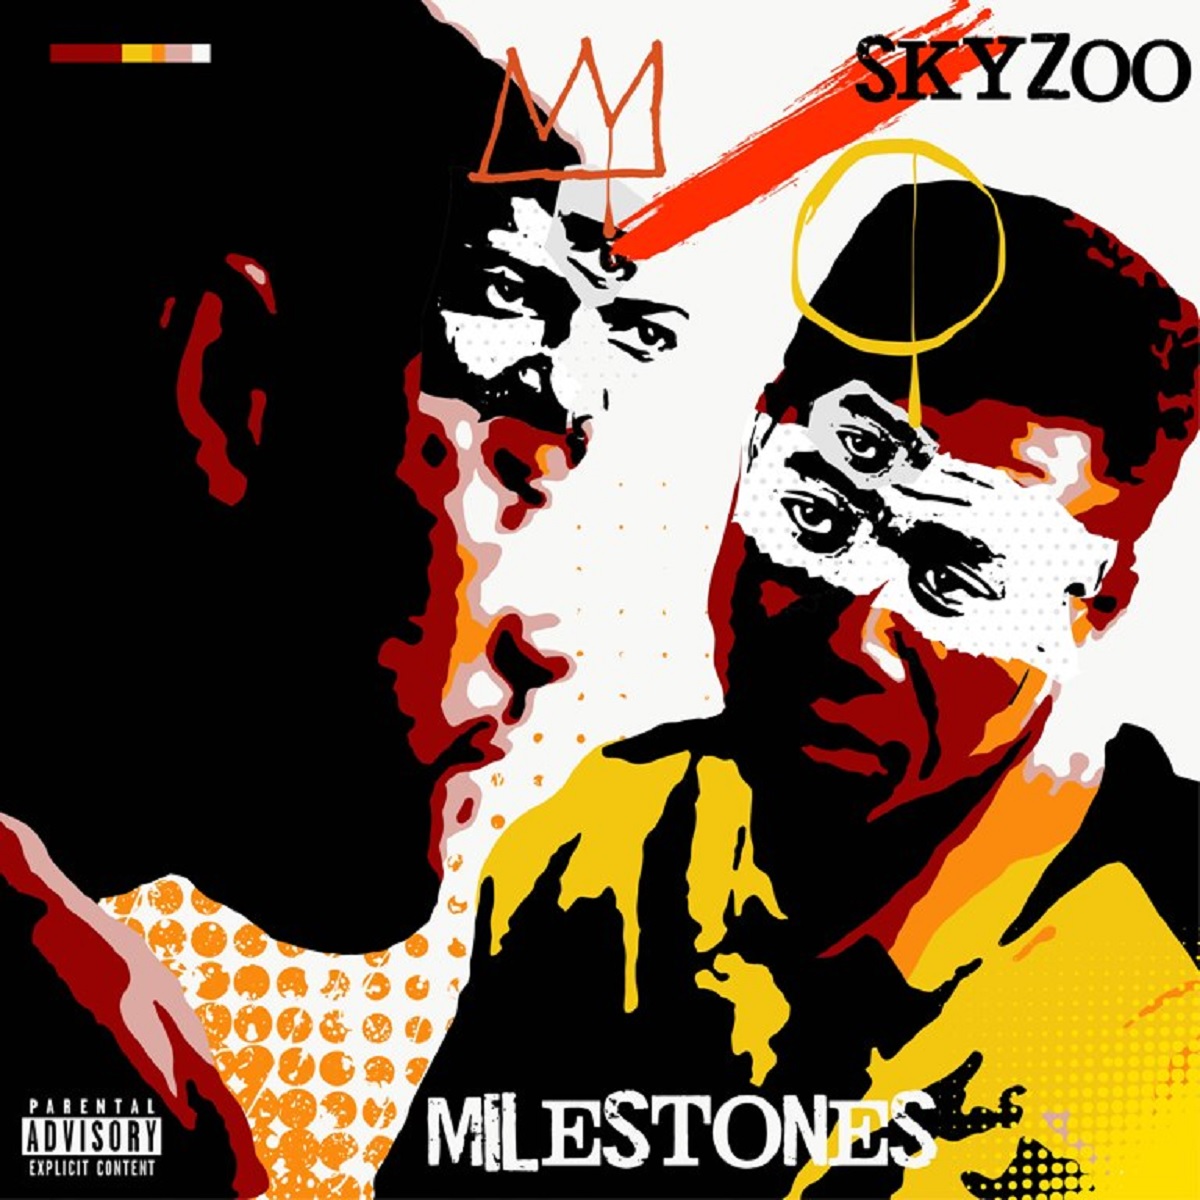 Skyzoo is preparing to release his EP, "Milestones," on June 19. This project is dedicated to all of the fathers out there. The first single comes in the form of "A Song For Fathers," which dropped this week.